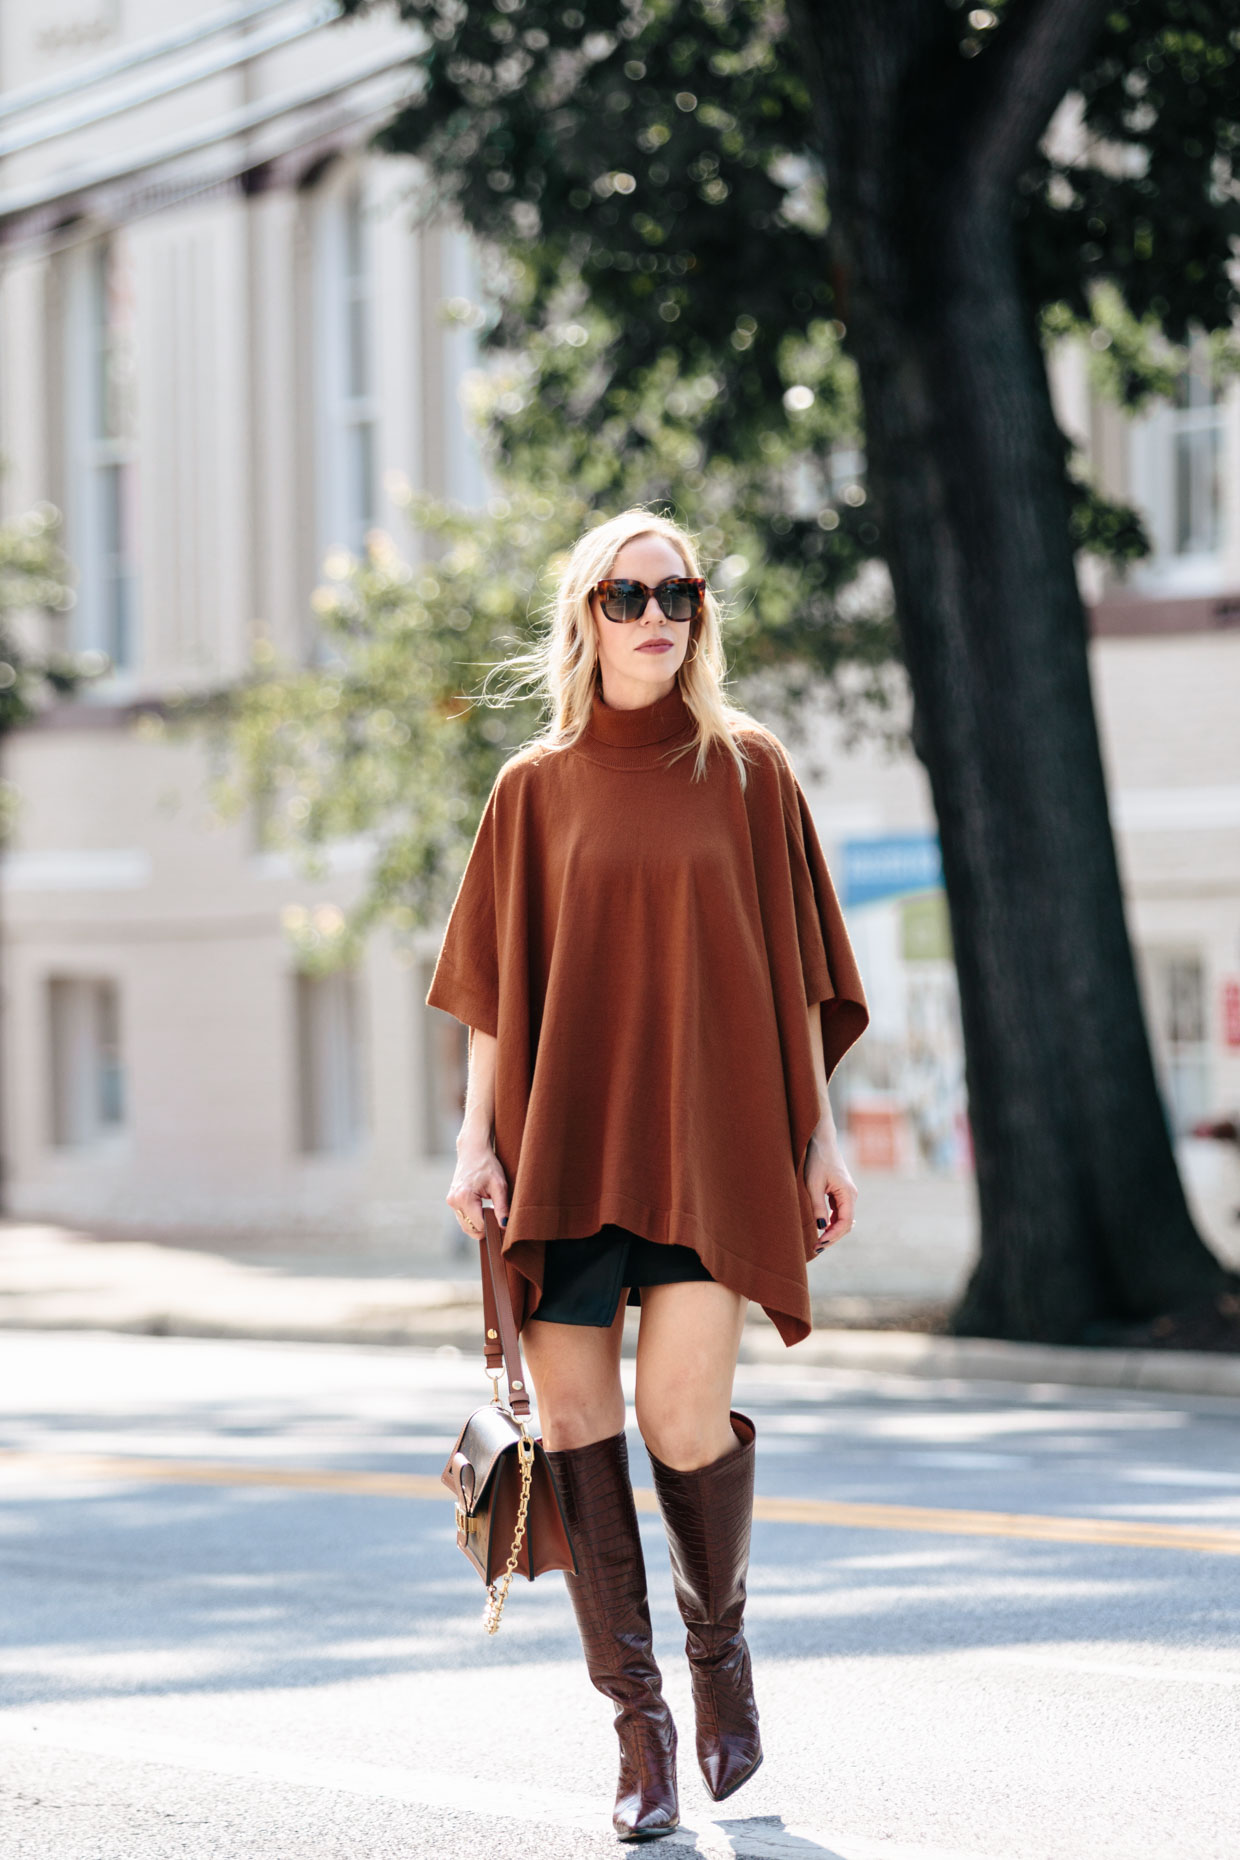 The $25 Poncho That Will Make You Look Like a Million Bucks